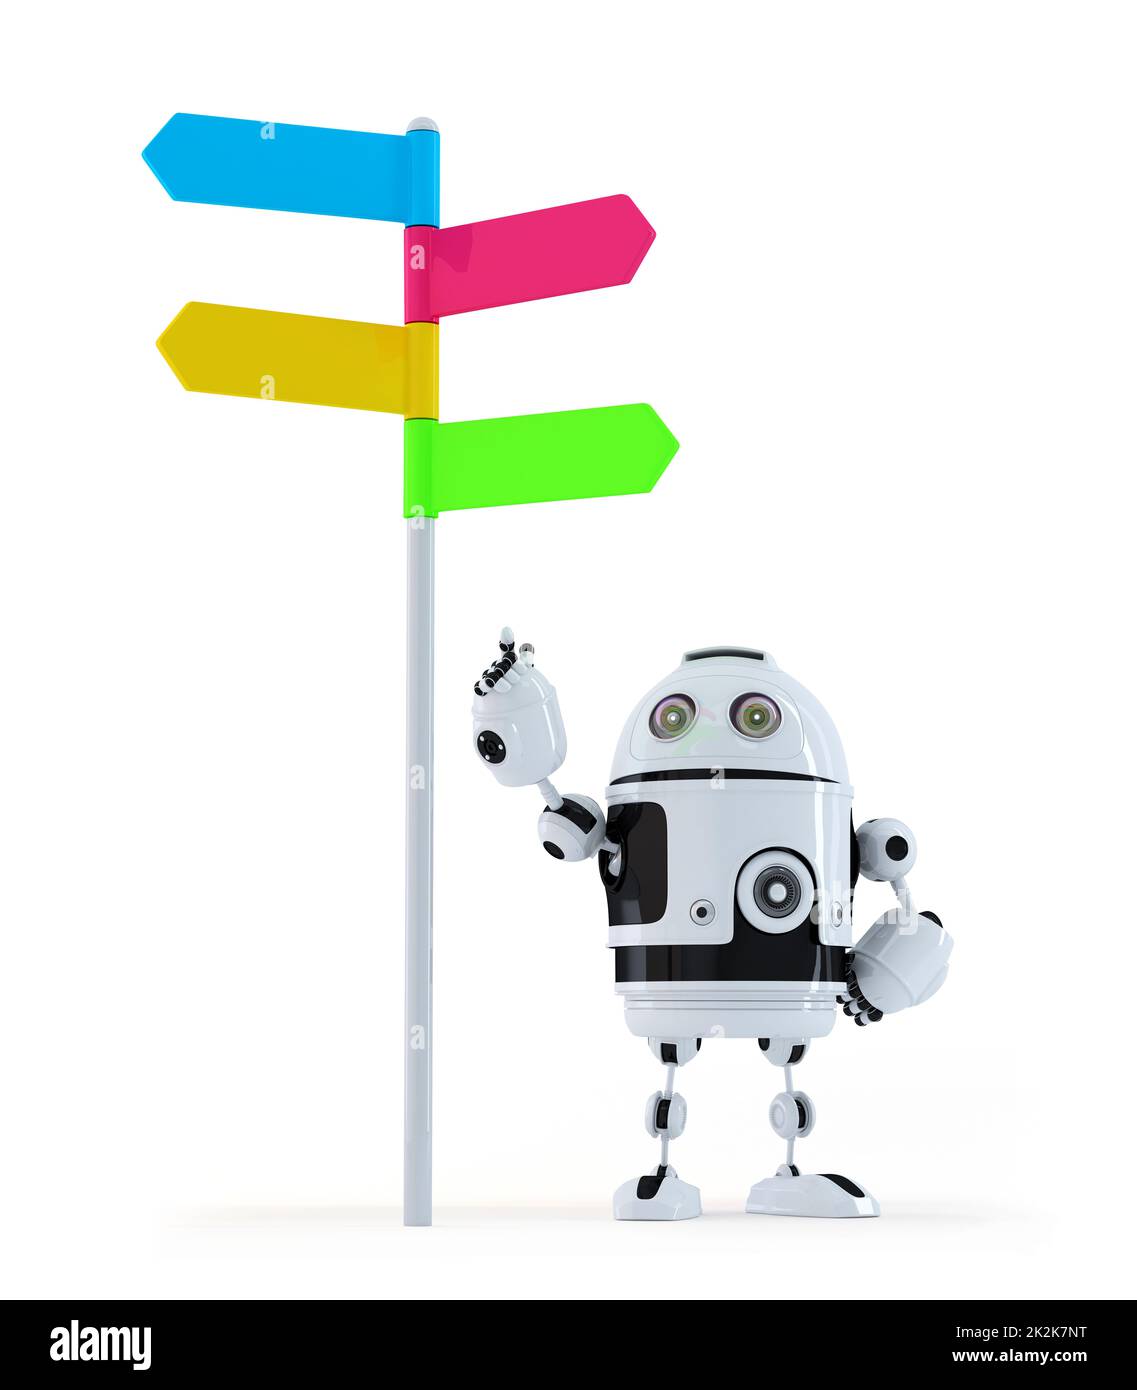 Robot pointing at road sign Stock Photo